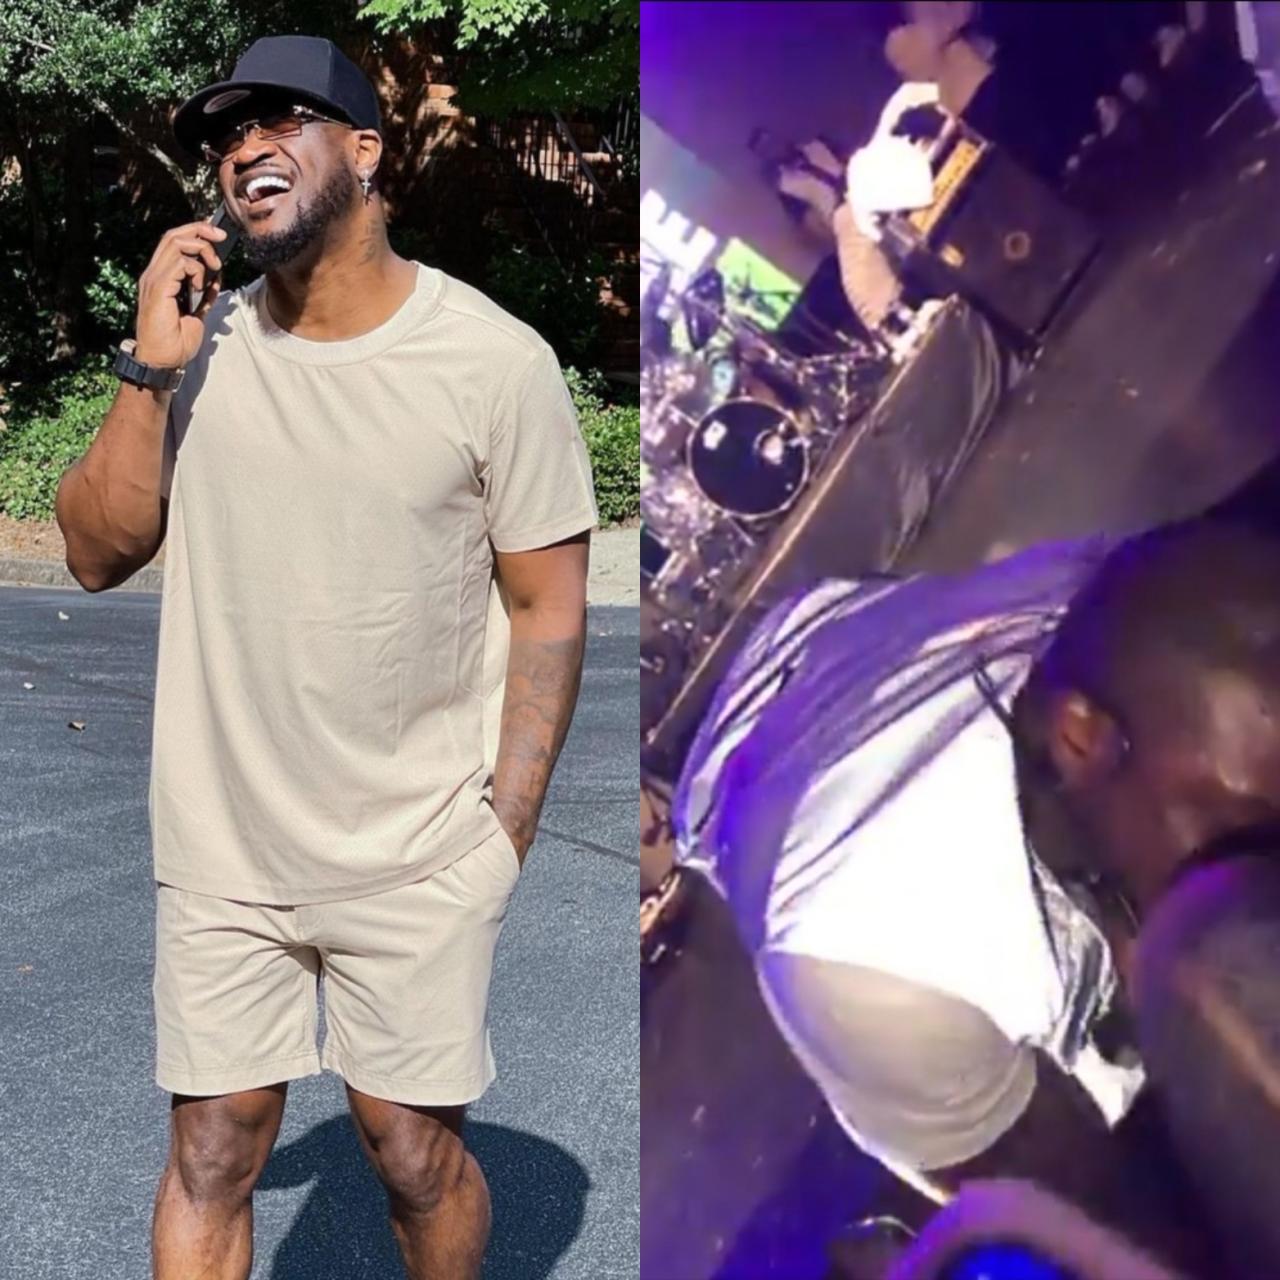 No One From My Family Is Complaining - Peter Okoye Reacts To Backlash He Received For Kissing A Fan On Stage